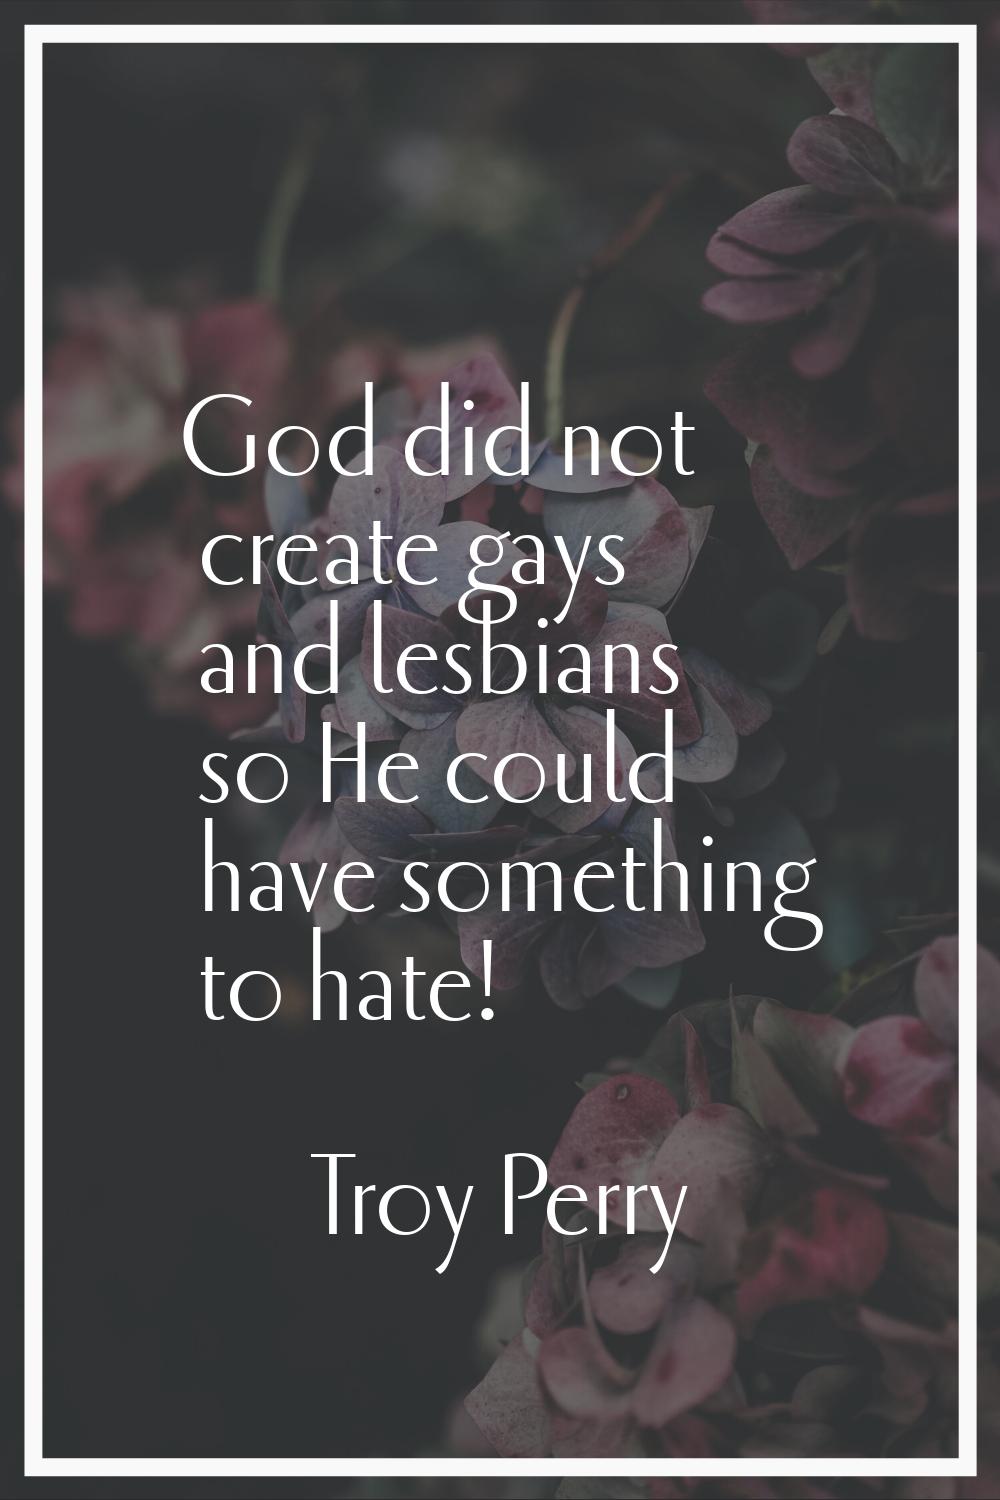 God did not create gays and lesbians so He could have something to hate!